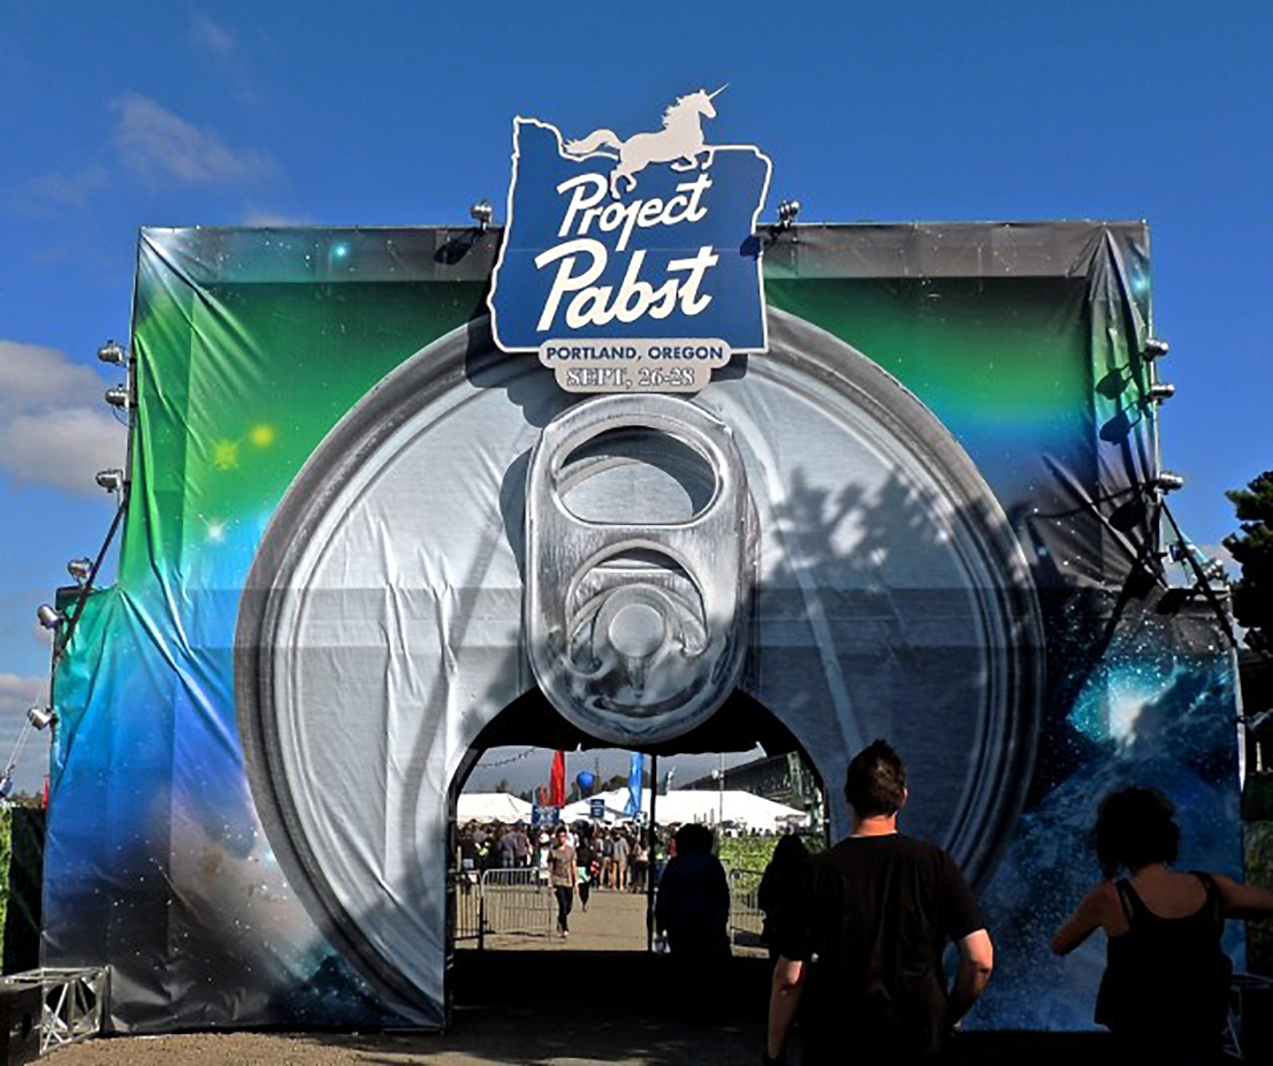 Project Pabst brings new excitement to Portland The Advocate Online